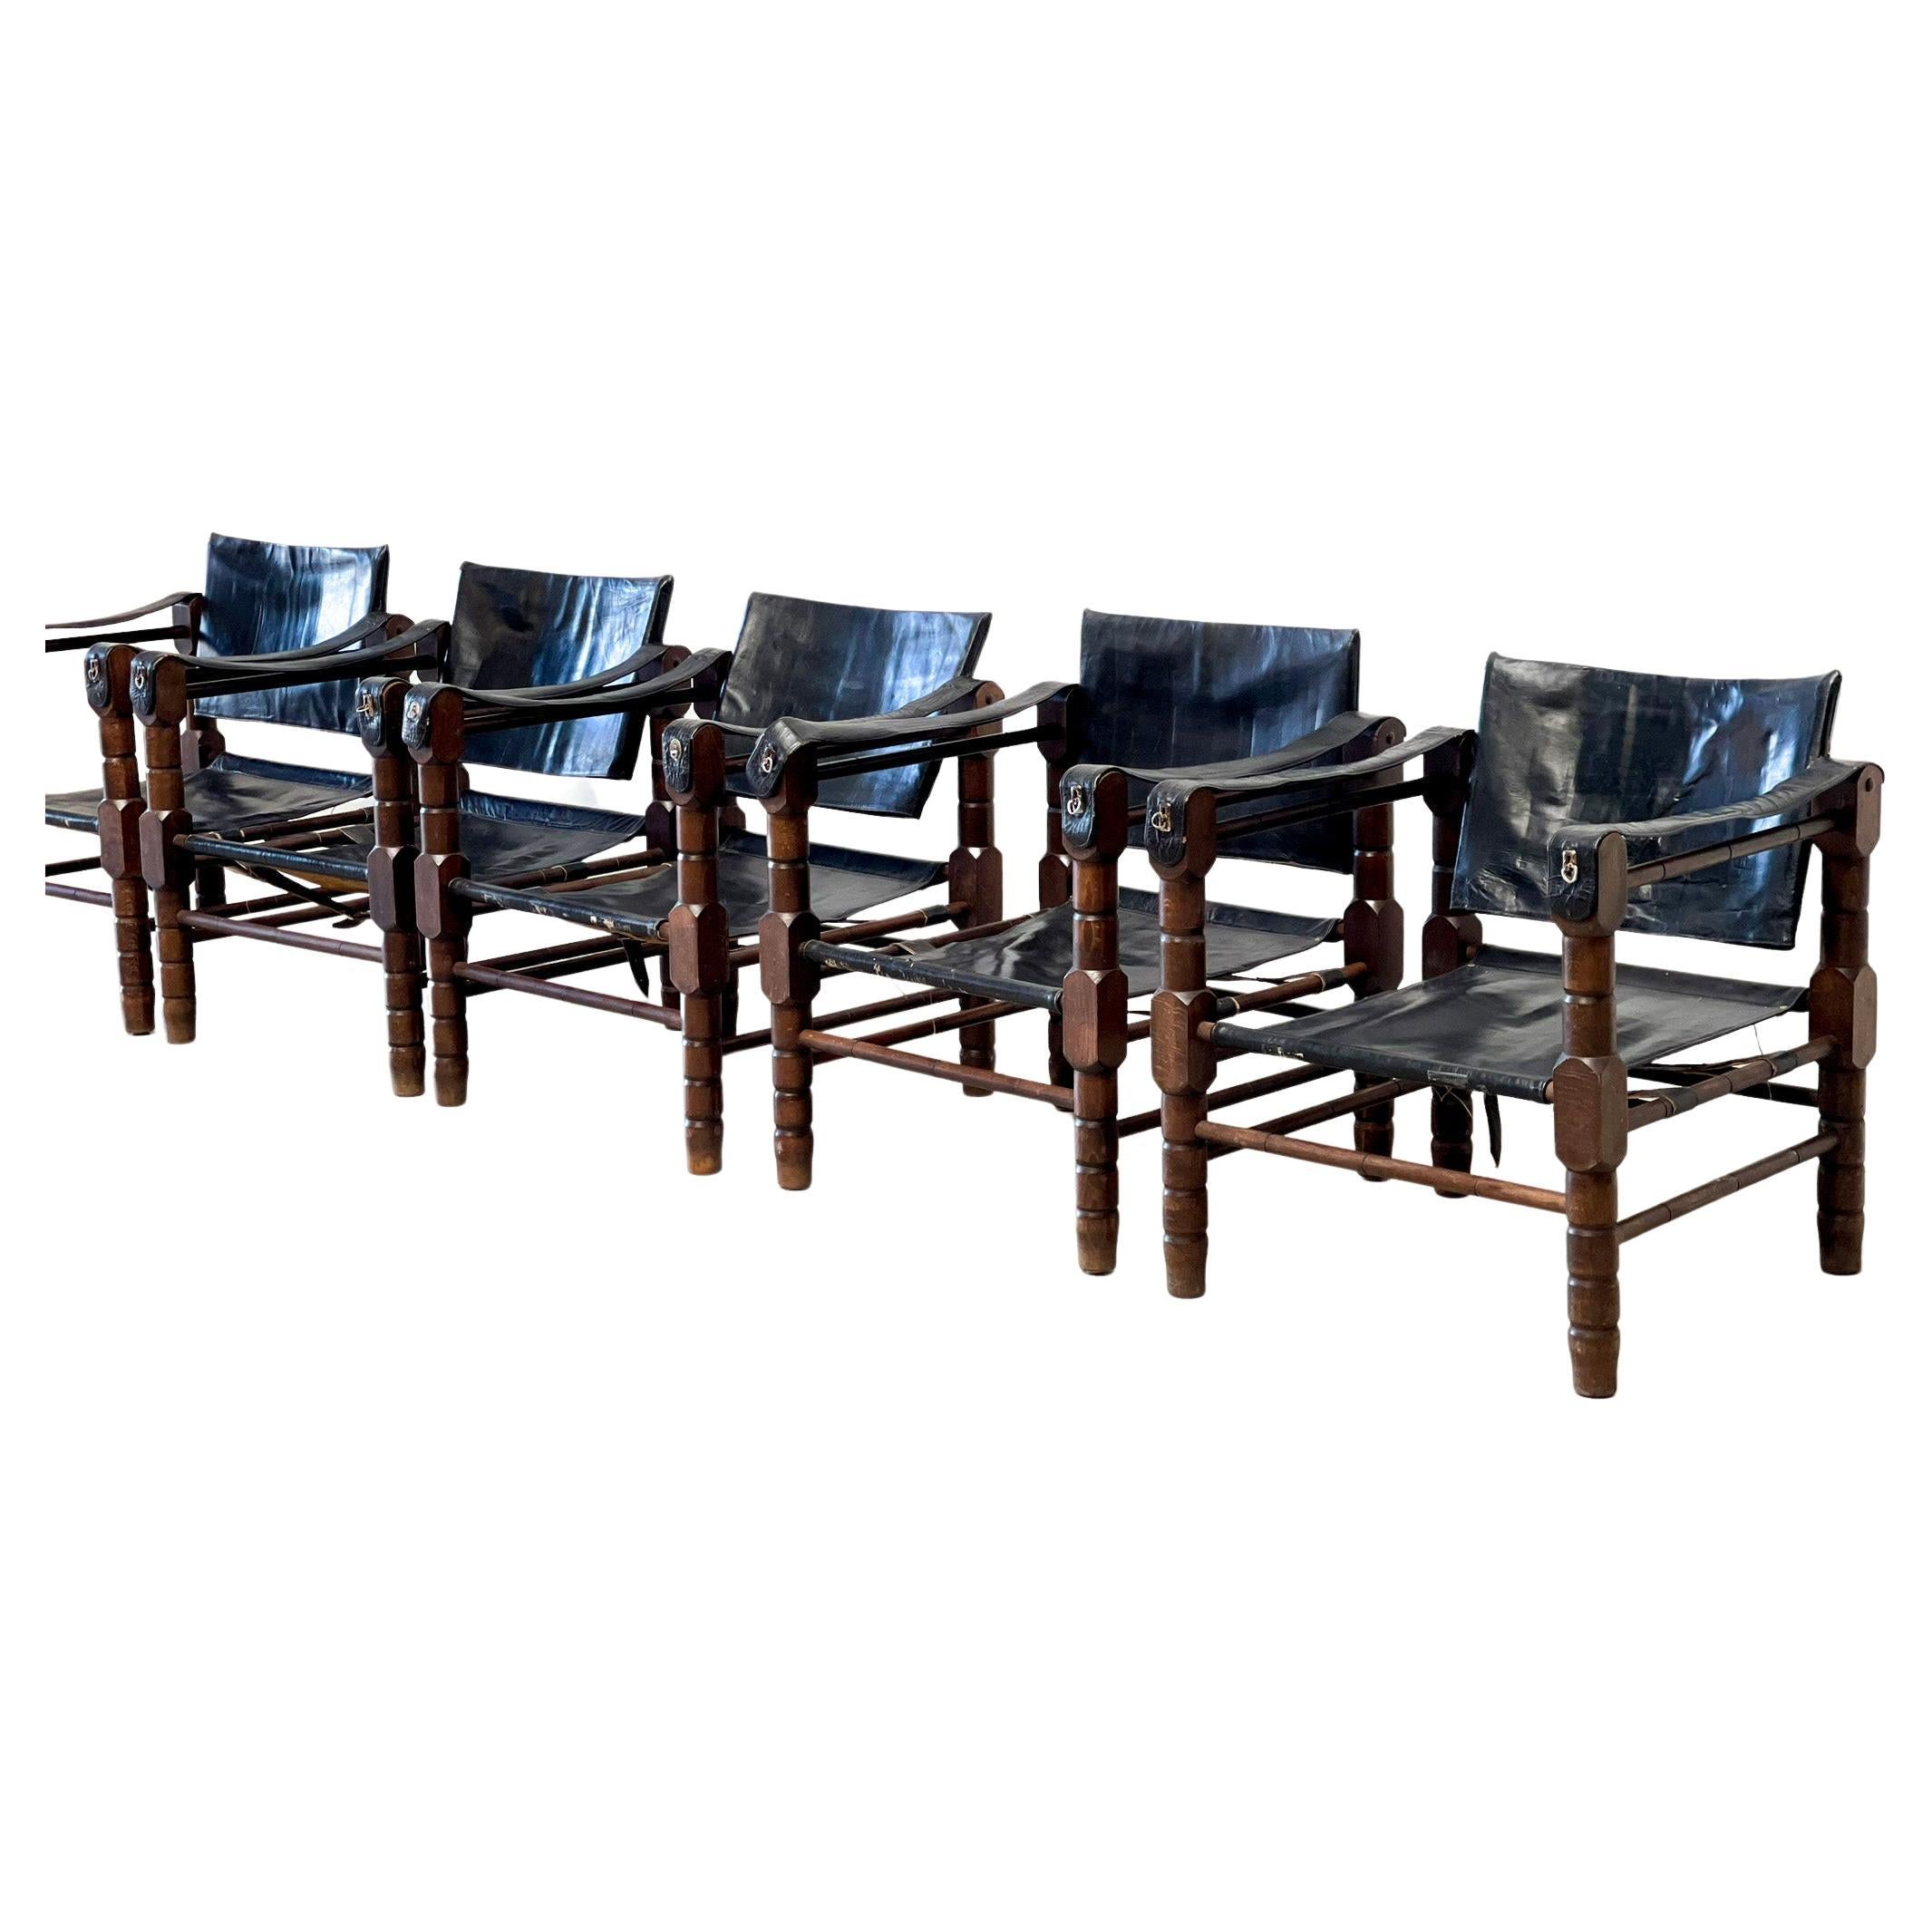 XL set Safari chairs
Beautifully patinated safari chairs. It is exceptional to see a set of 5 the same safari chairs with the same patina. These have a beautiful black leather seat and back. We are not sure about who made these chairs. But they are